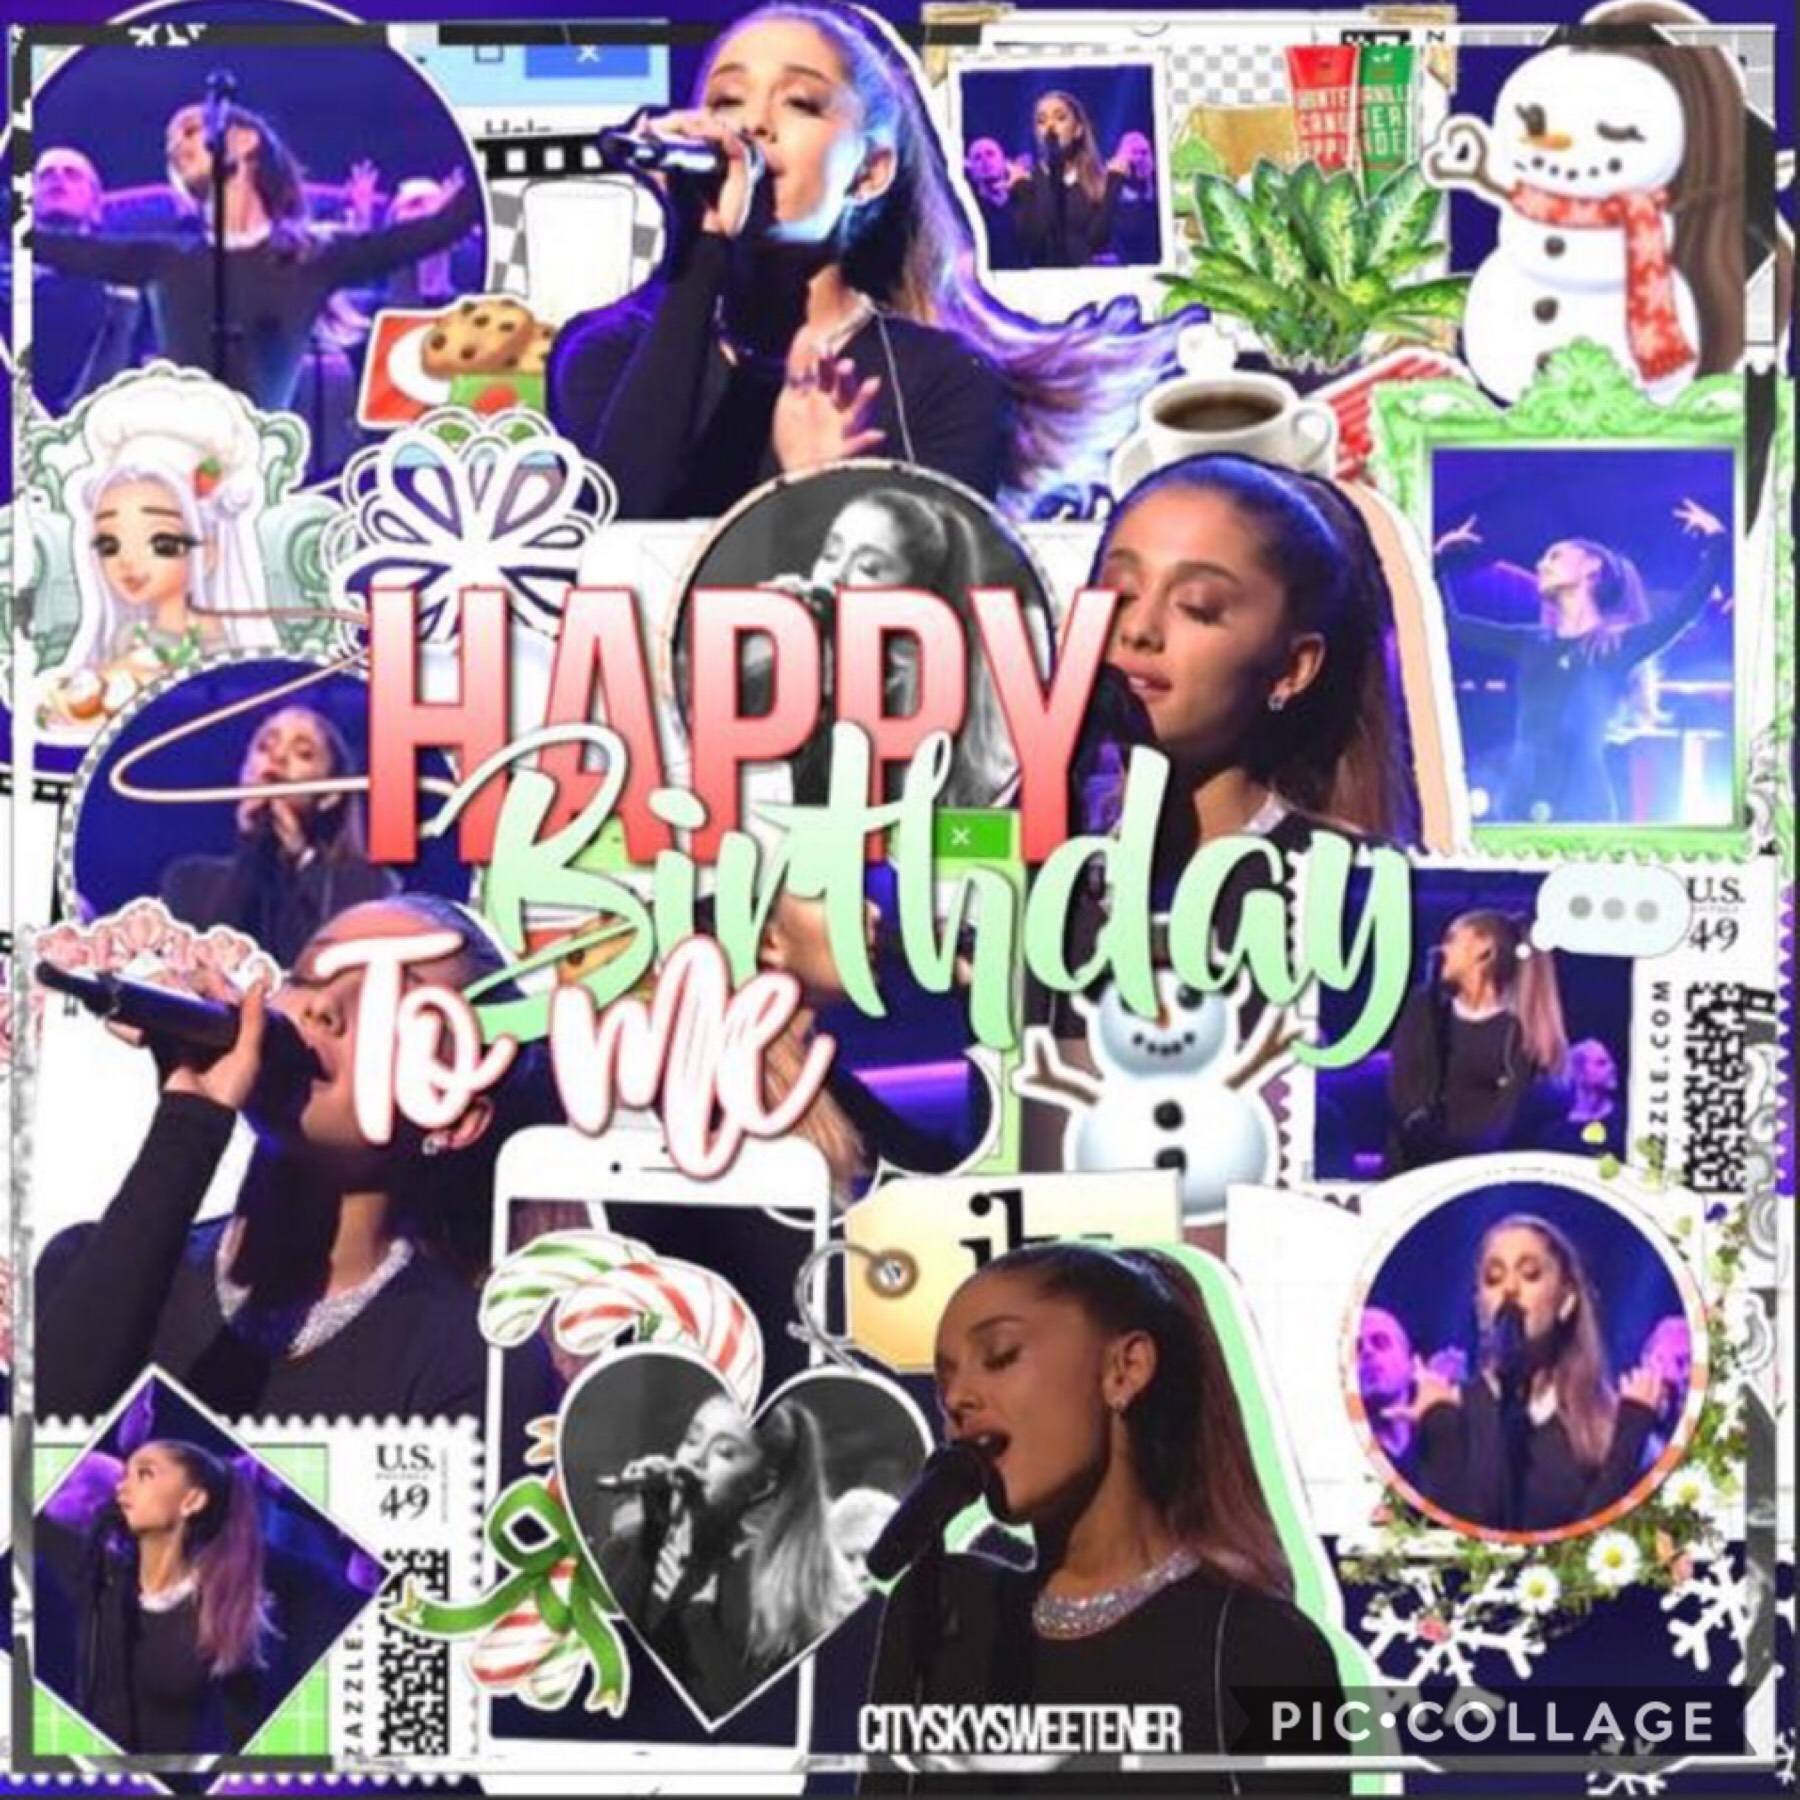 GUESS WHOS BDAY IT IS!!!!🥳🥳🥳🥳 (well it’s actually tomorrow but I felt like posting it today 😂😂) sorry if it looks blurry